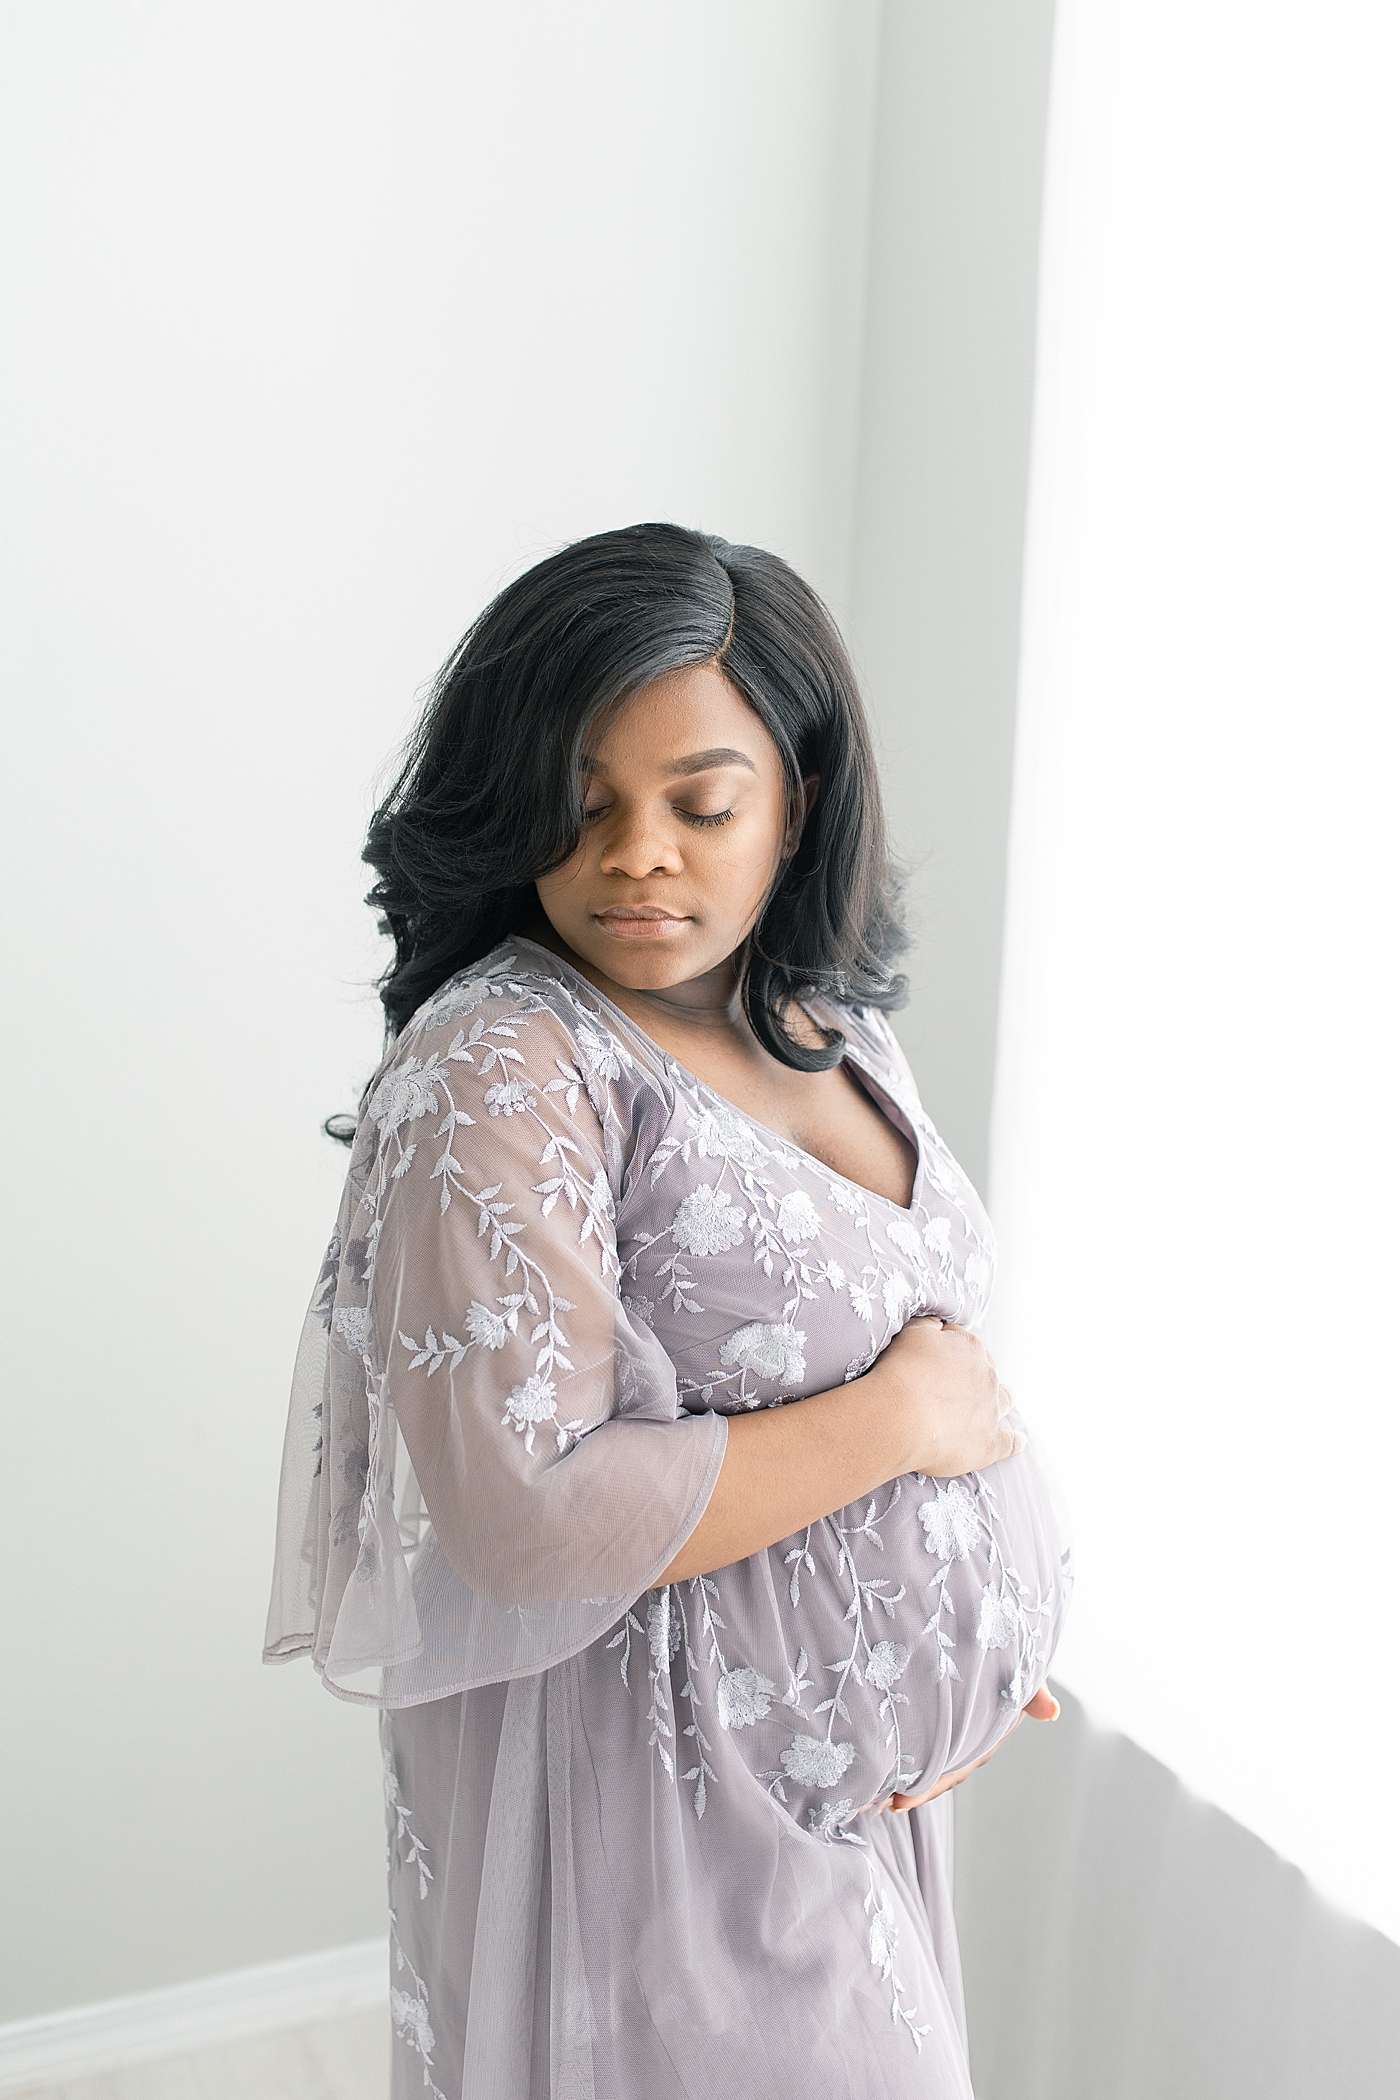 Mother to be in an embroidered lavender dress | Photo by Little Sunshine Photography